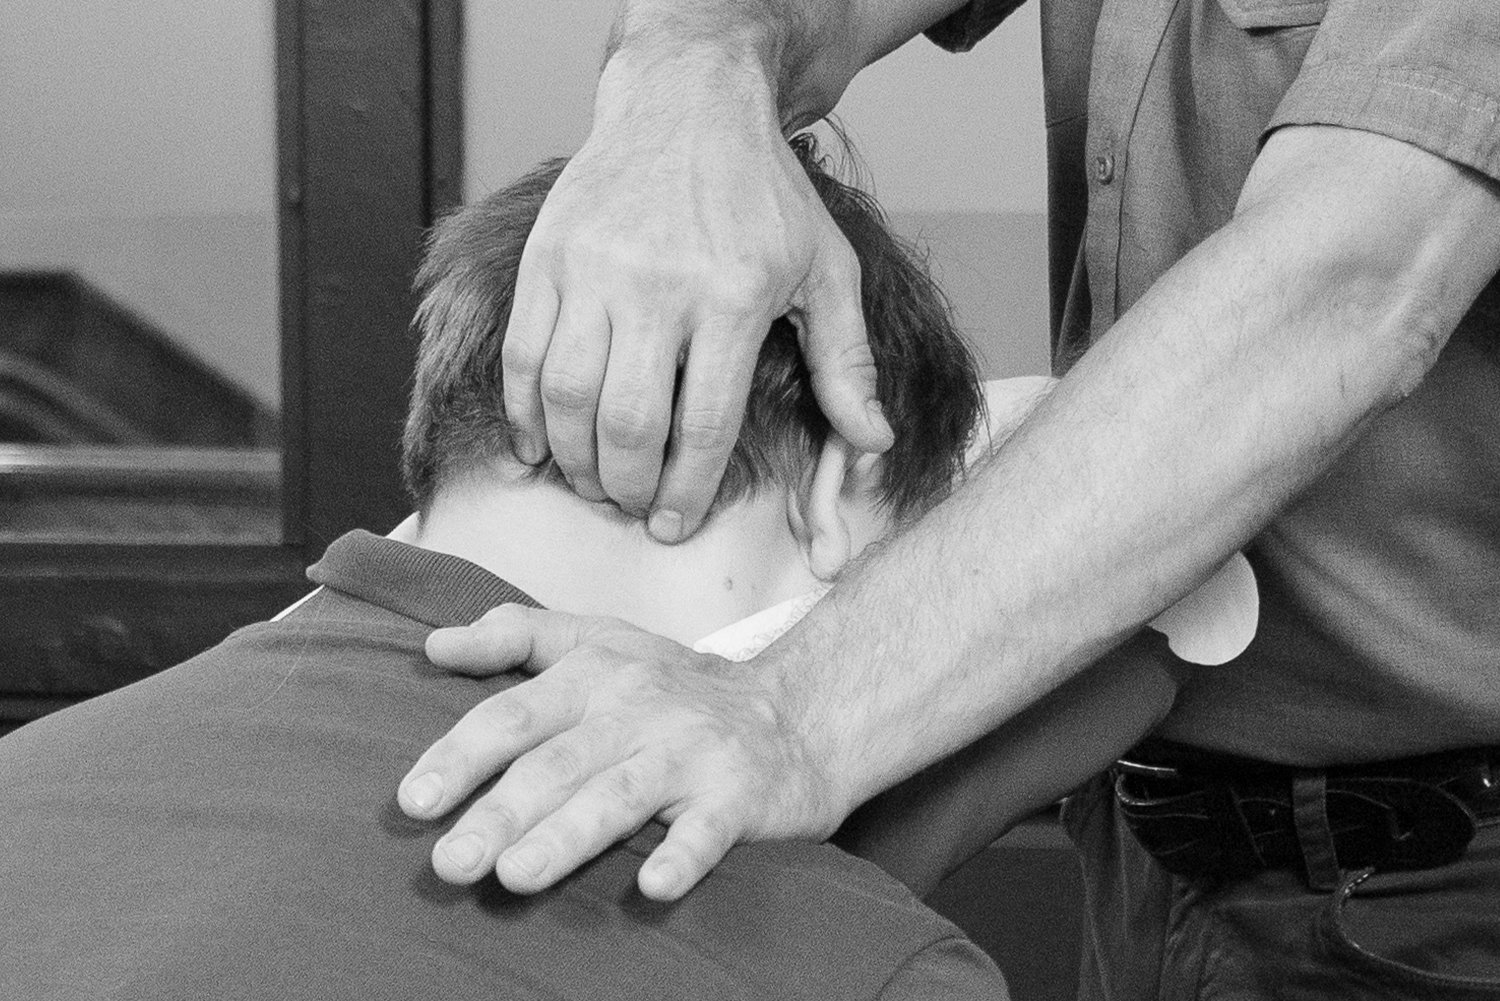  deep pressure seated massage being administered to someone’s neck and shoulders at The Backstop in Northampton, MA 